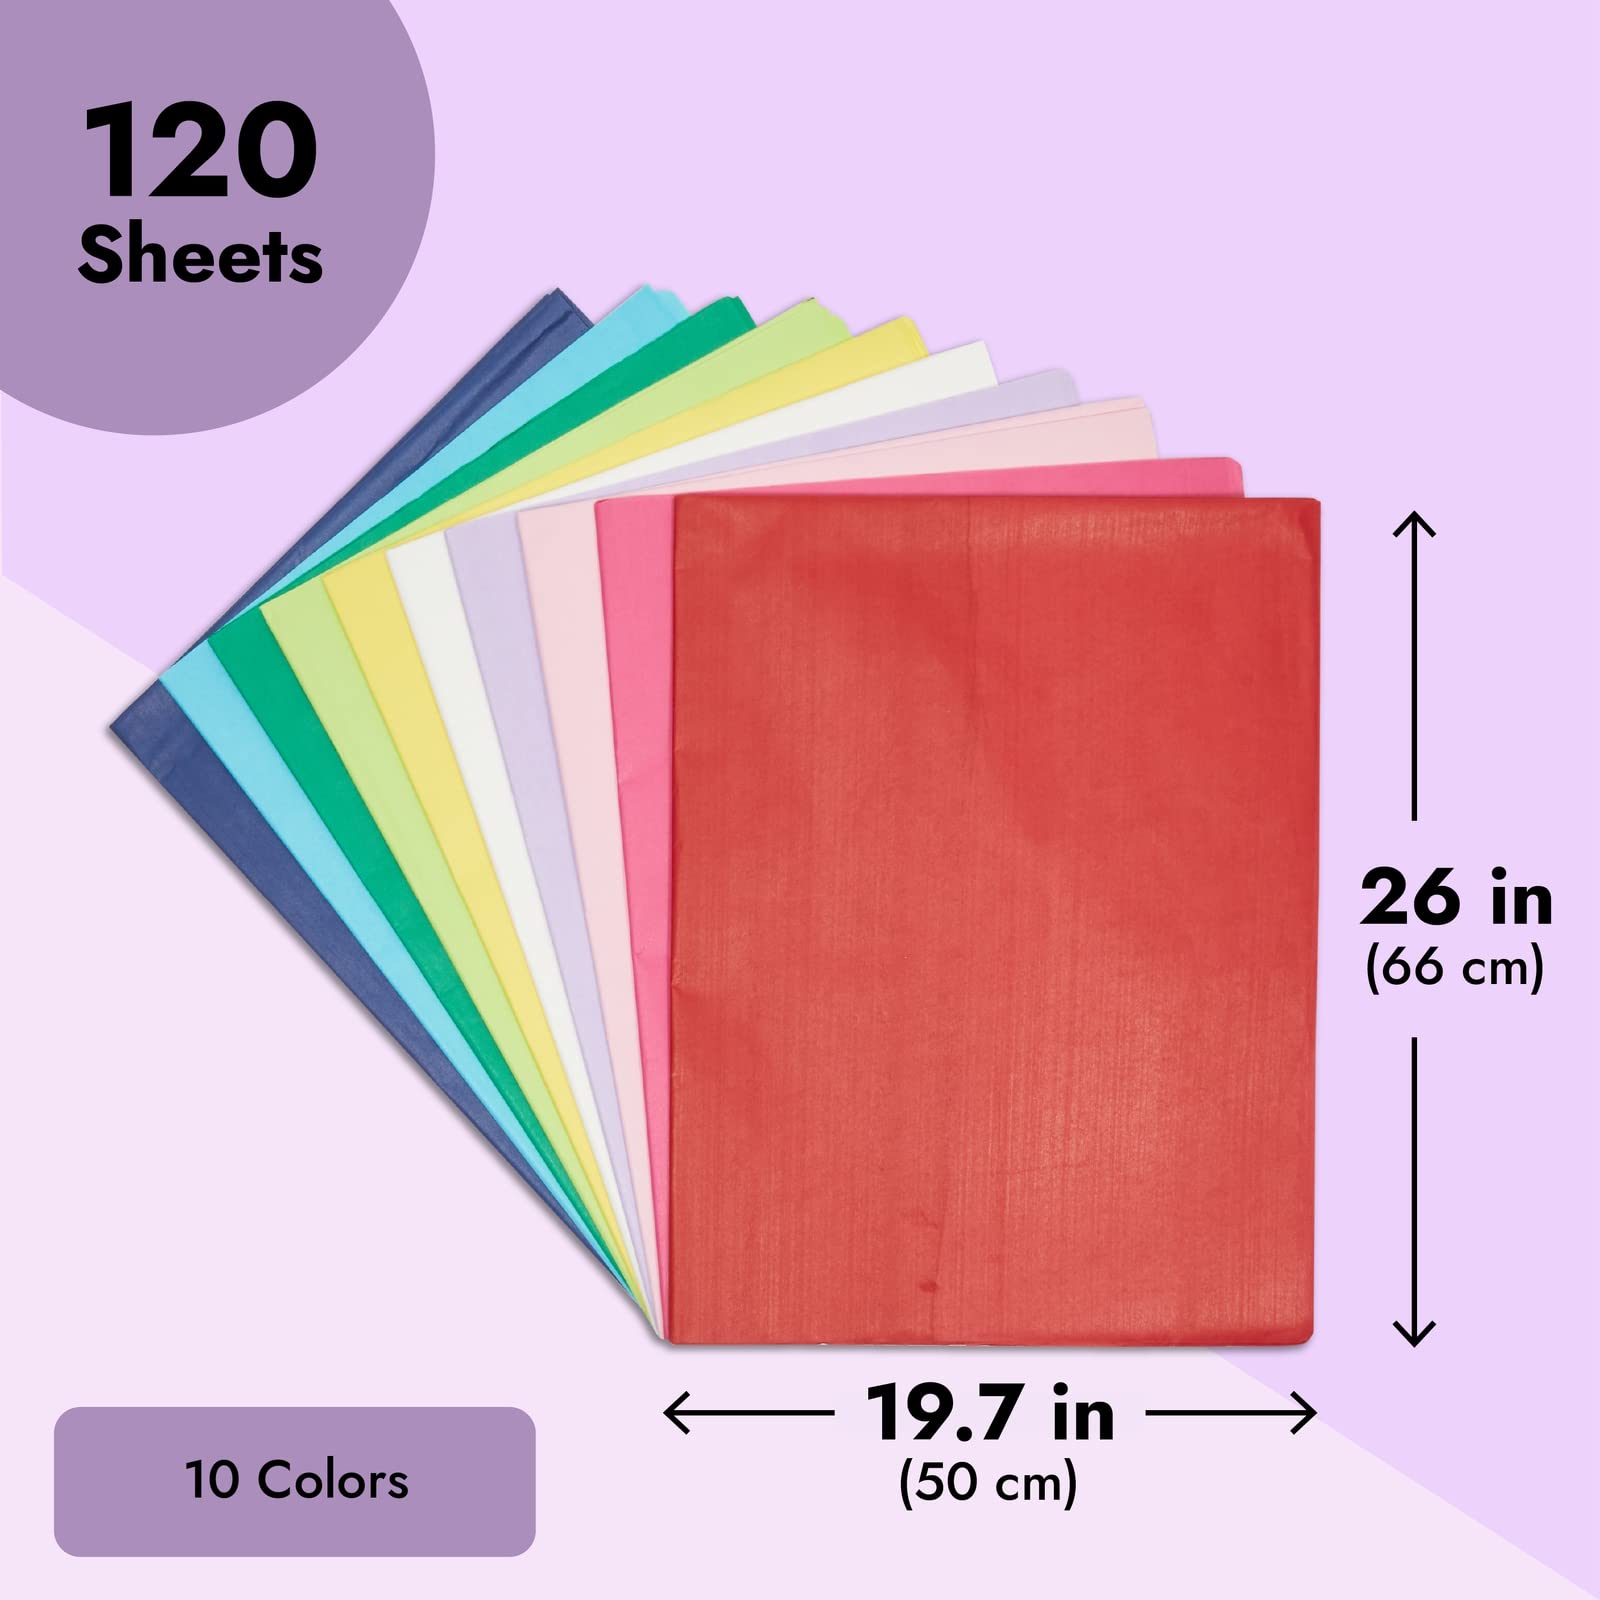 120-Sheets 20x26 in Tissue Paper for Gift Bags, Wrapping, 10 Assorted Colors, Bulk Pack for DIY Arts and Crafts, Packaging, Party Décor, Multicolor Gift Wrap Tissue